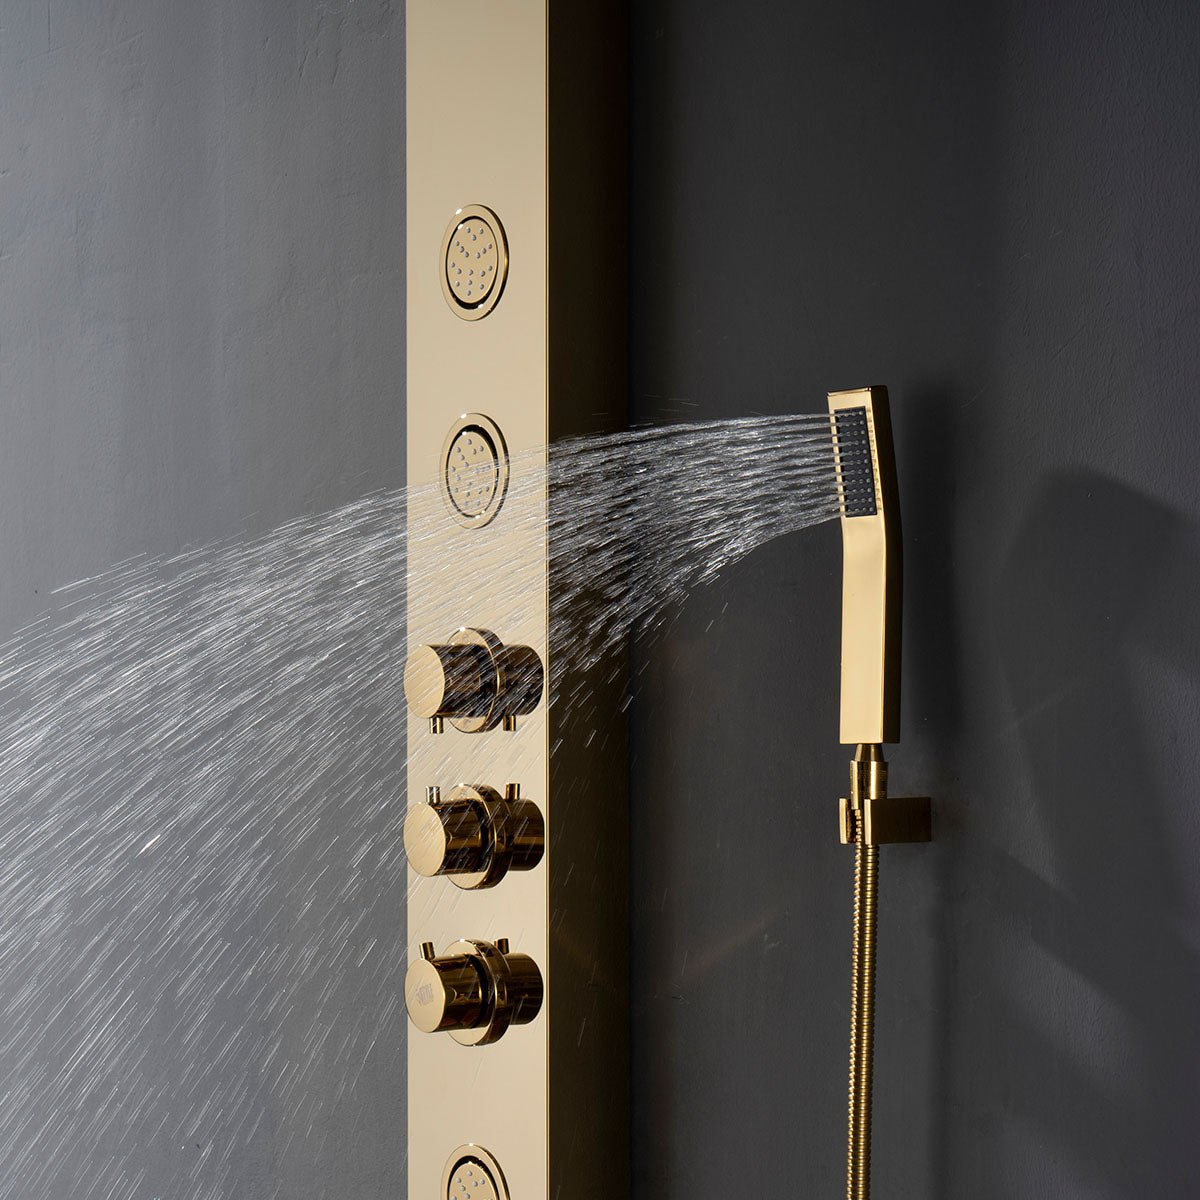 SP-5654BG Stainless Steel Shower Panel (Shinny Gold) - iStyle Bath